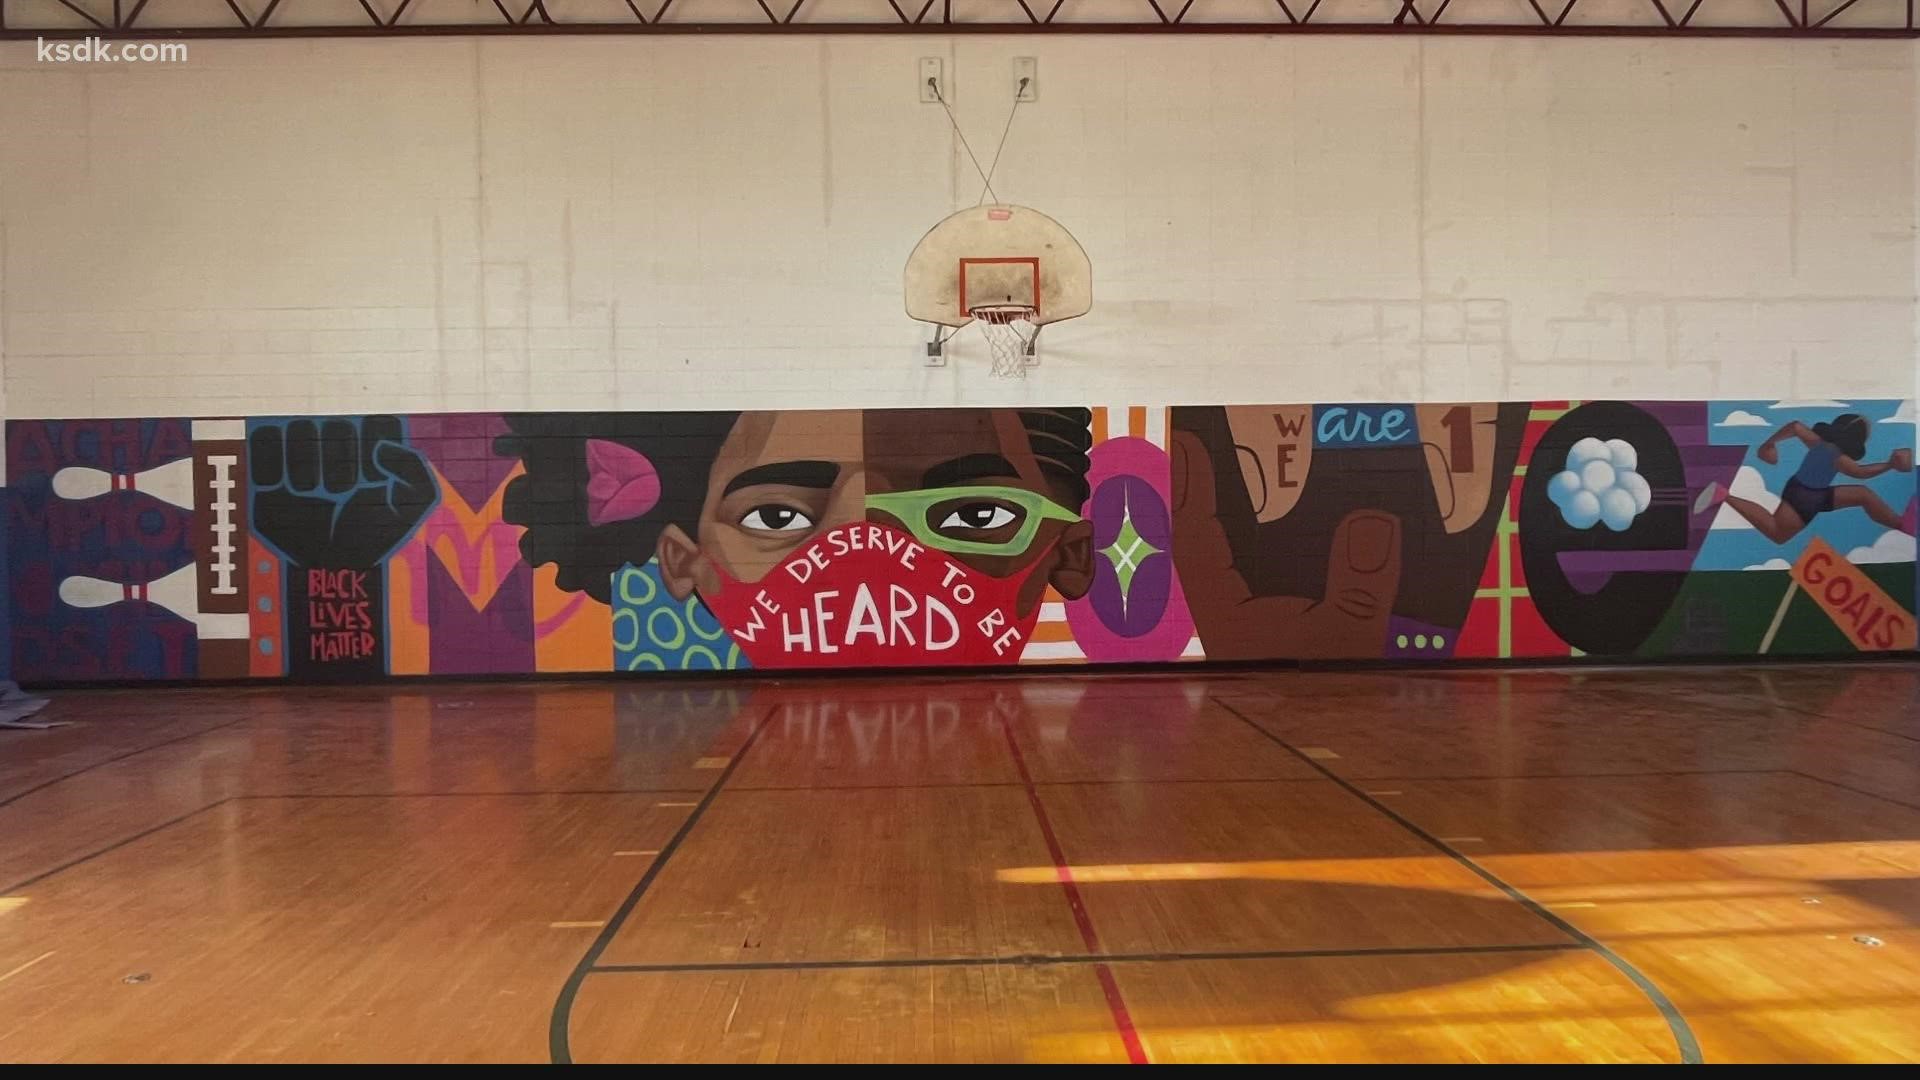 St. Louis artist Cbabi Bayoc painted a mural at Cahokia High School. The words in the mural "Black Lives Matter" were painted over.